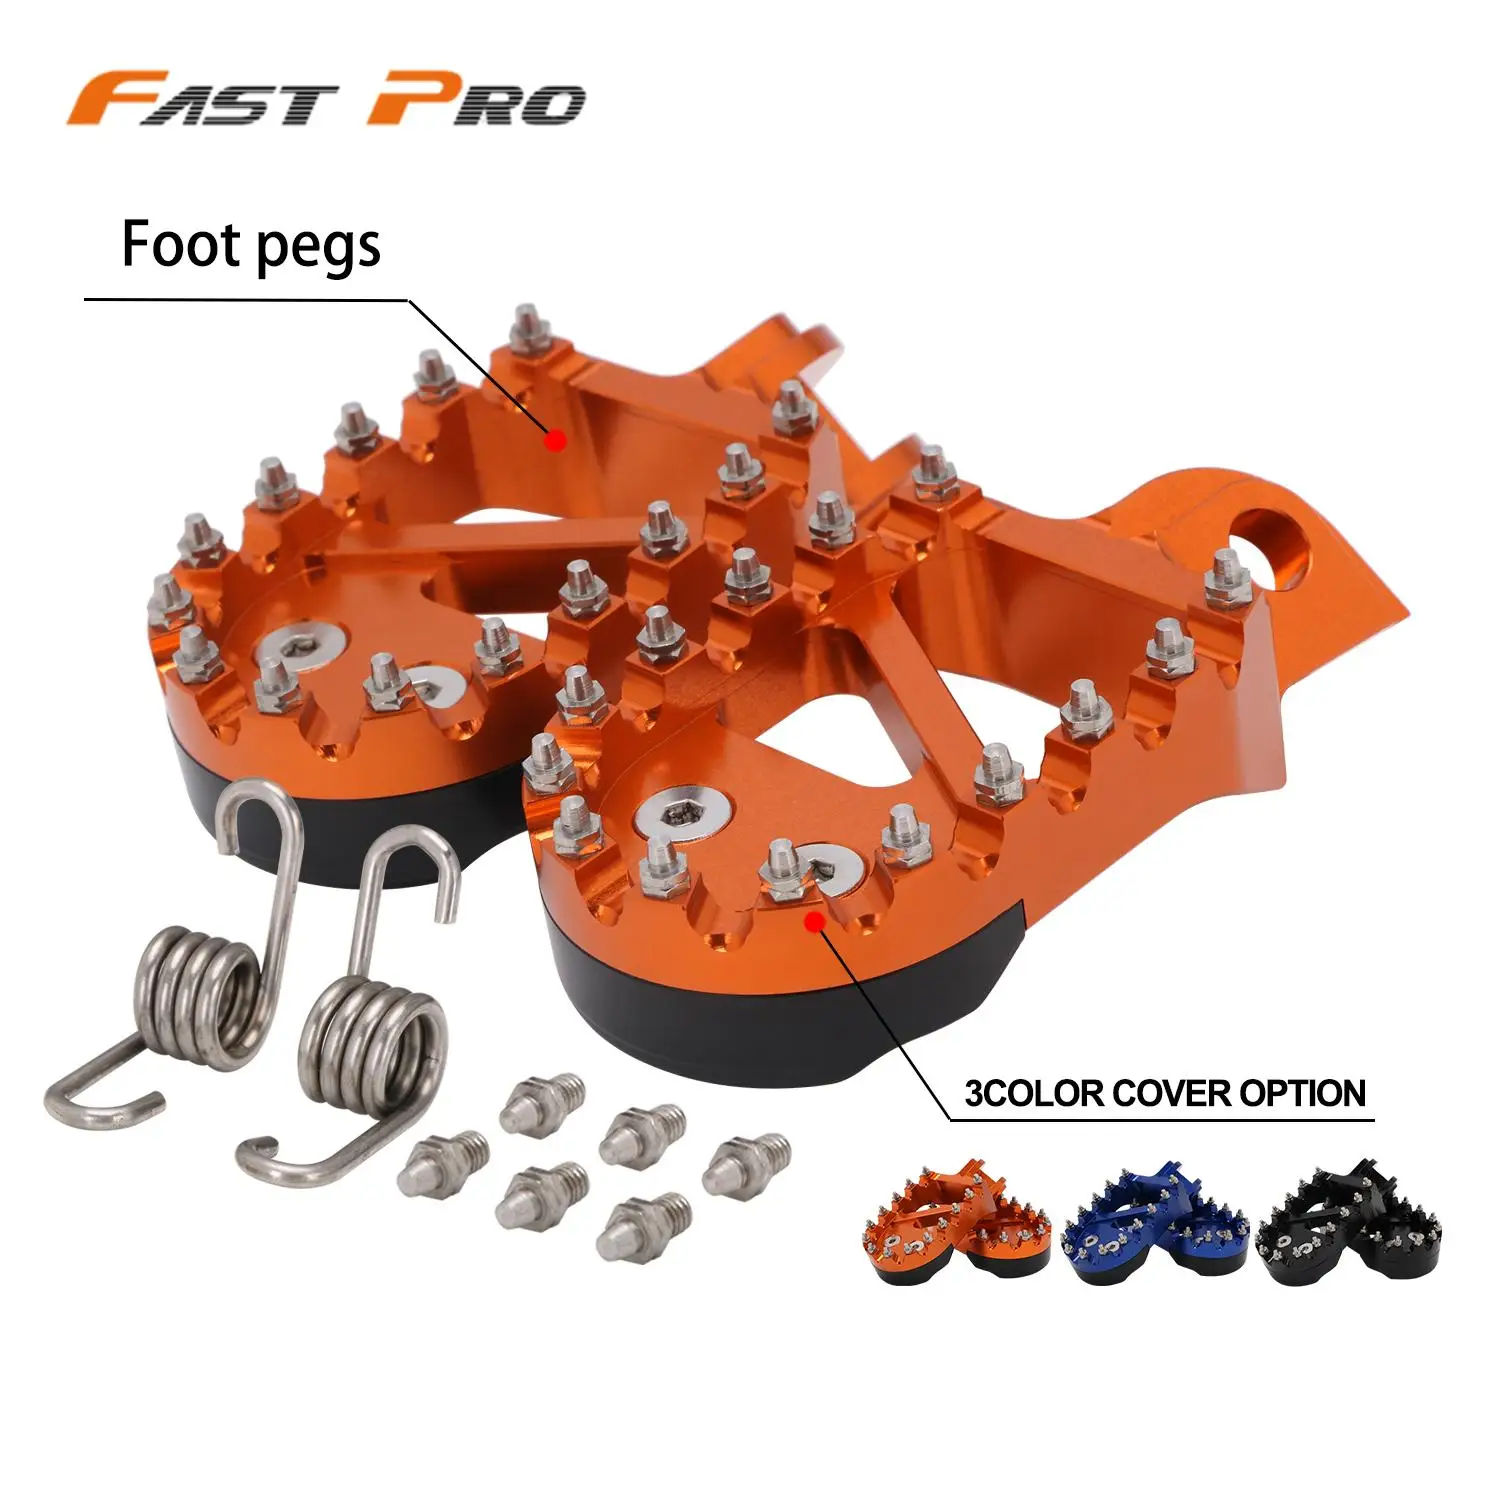 

Motorcycle Footpegs Foot Pegs Pedals Rests For KTM SX XC SXF XCF XCW EXC EXCF XCFW 125 150 250 300 350 400 450 530 For Husqvarna